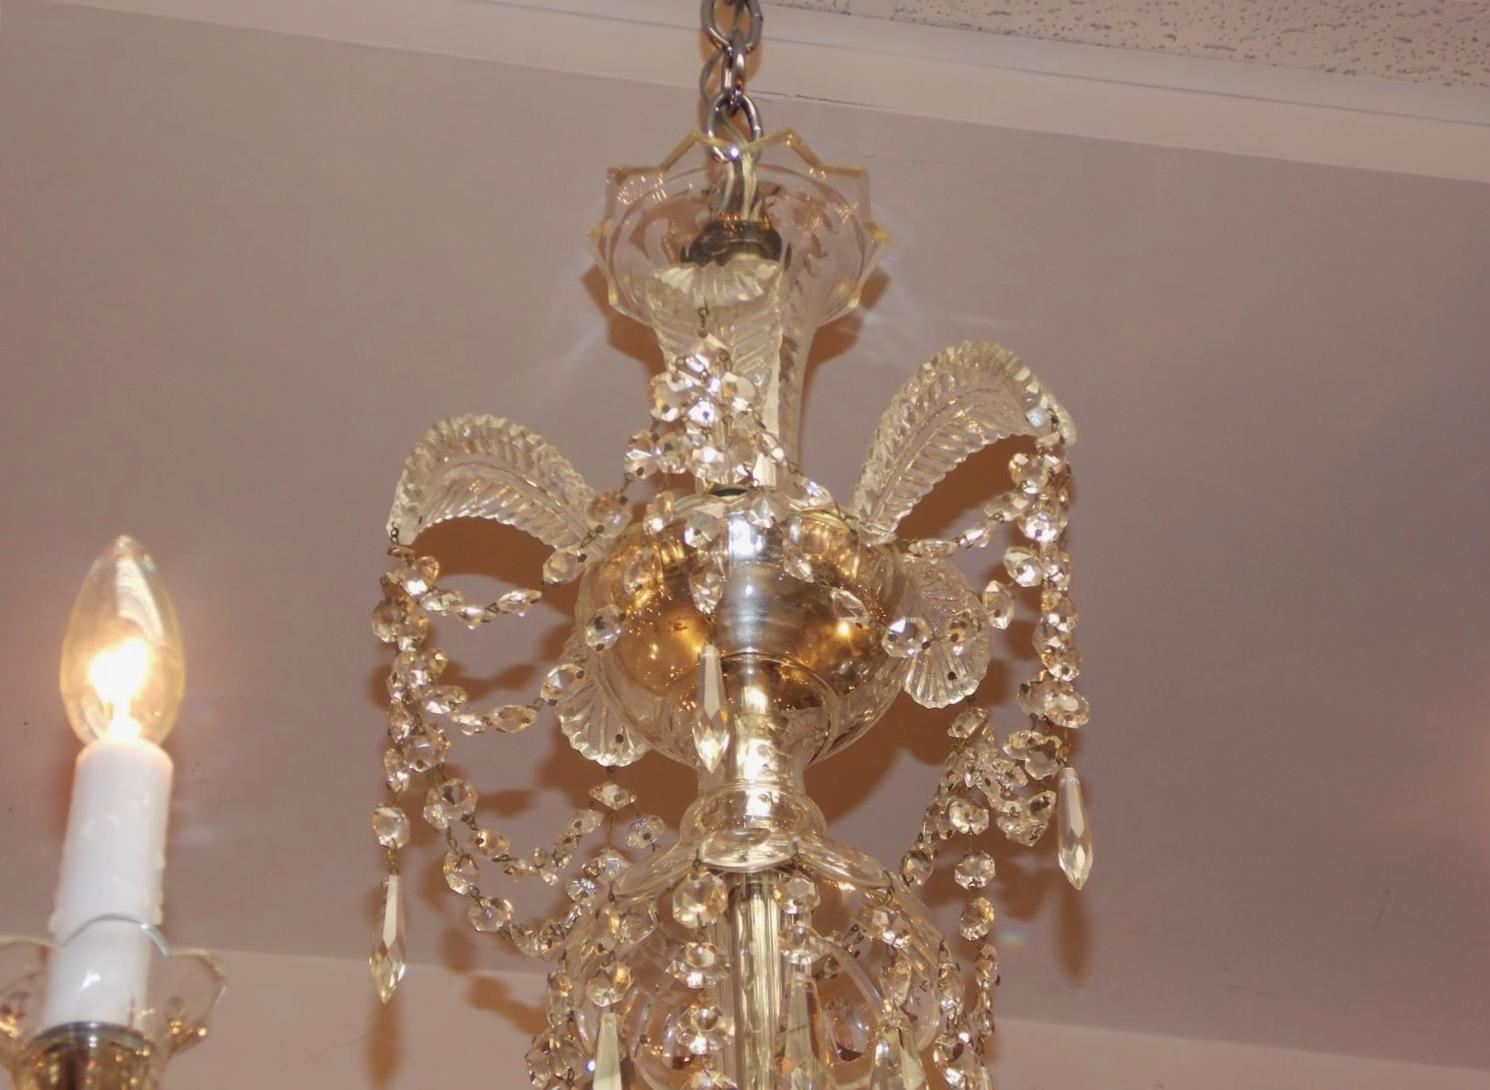 Anglo-Irish Cut Crystal Decorative Feather Five-Arm Chandelier, Circa 1840 In Excellent Condition For Sale In Hollywood, SC